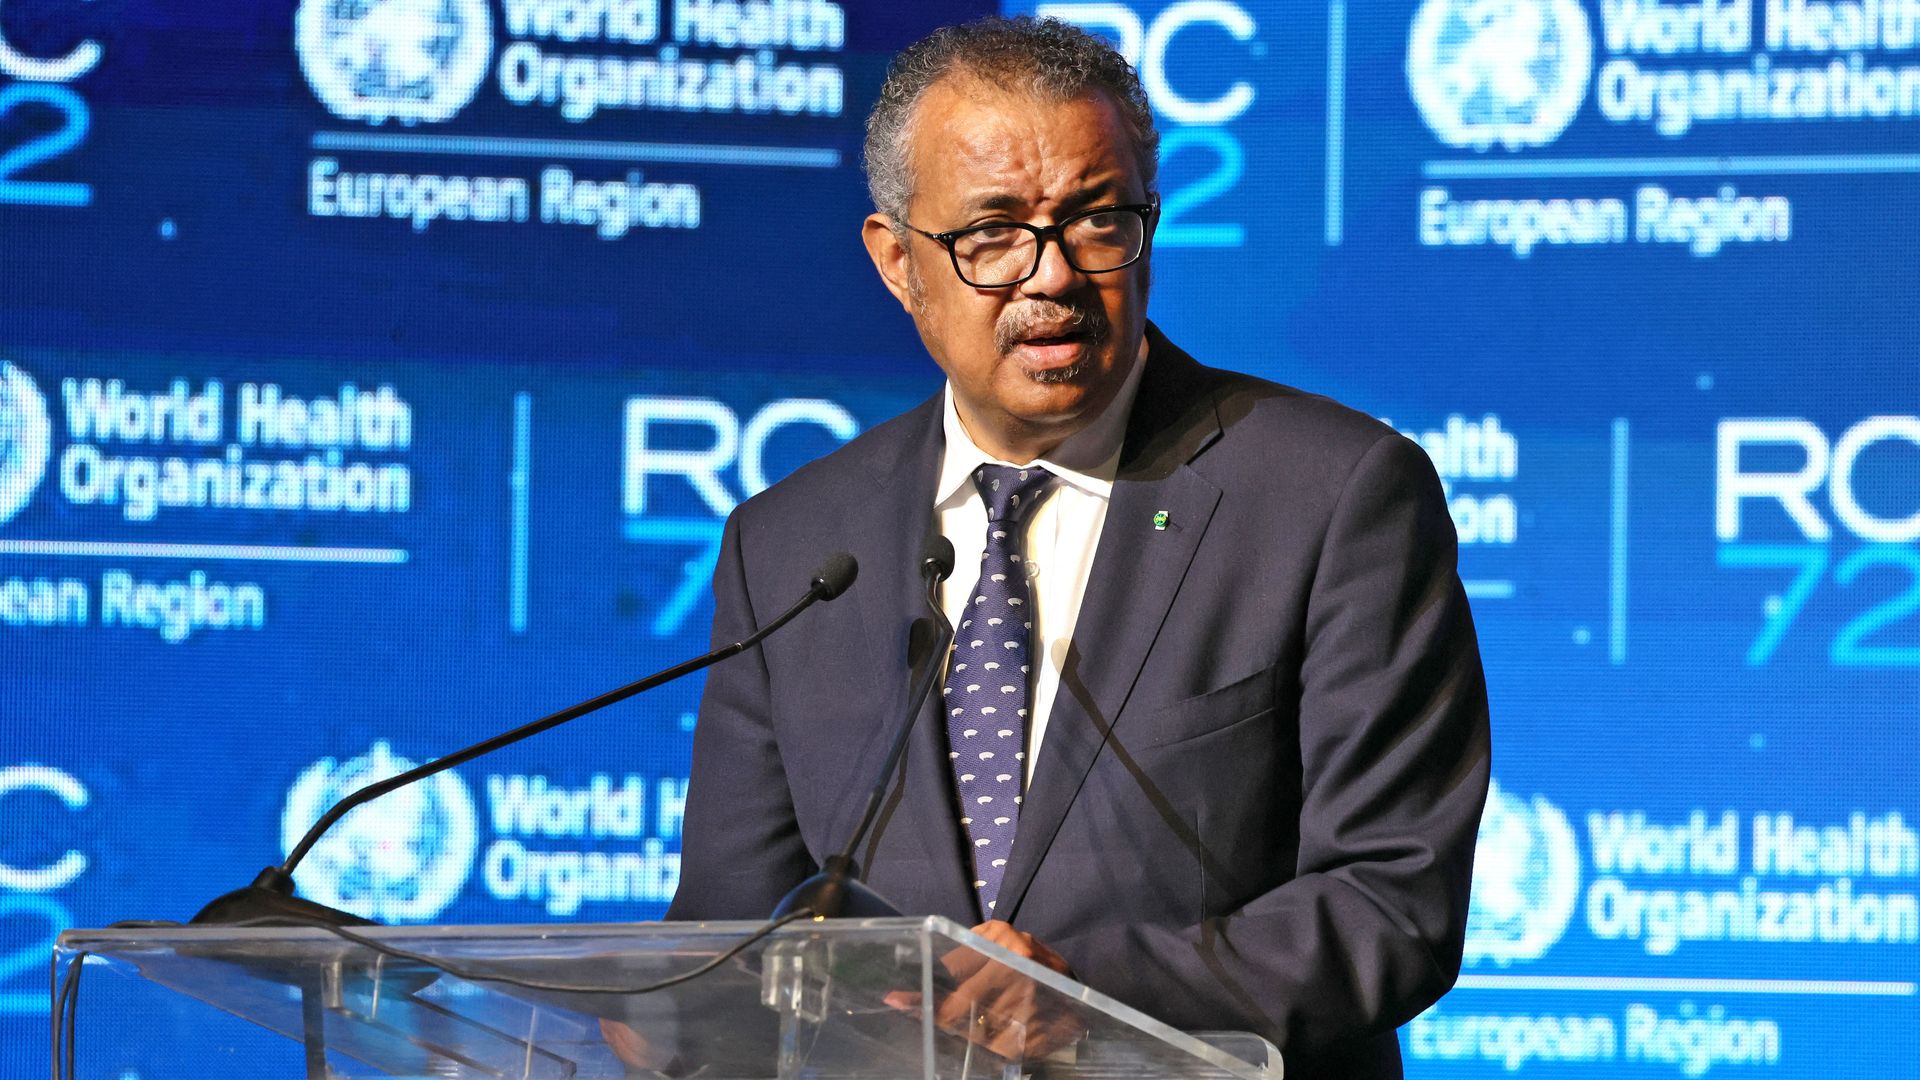 Director-General of the World Health Organisation (WHO) Tedros Adhanom Ghebreyesus delivers a speech during the 72nd session of the WHO Regional Committee for Europe on September 12, 2022